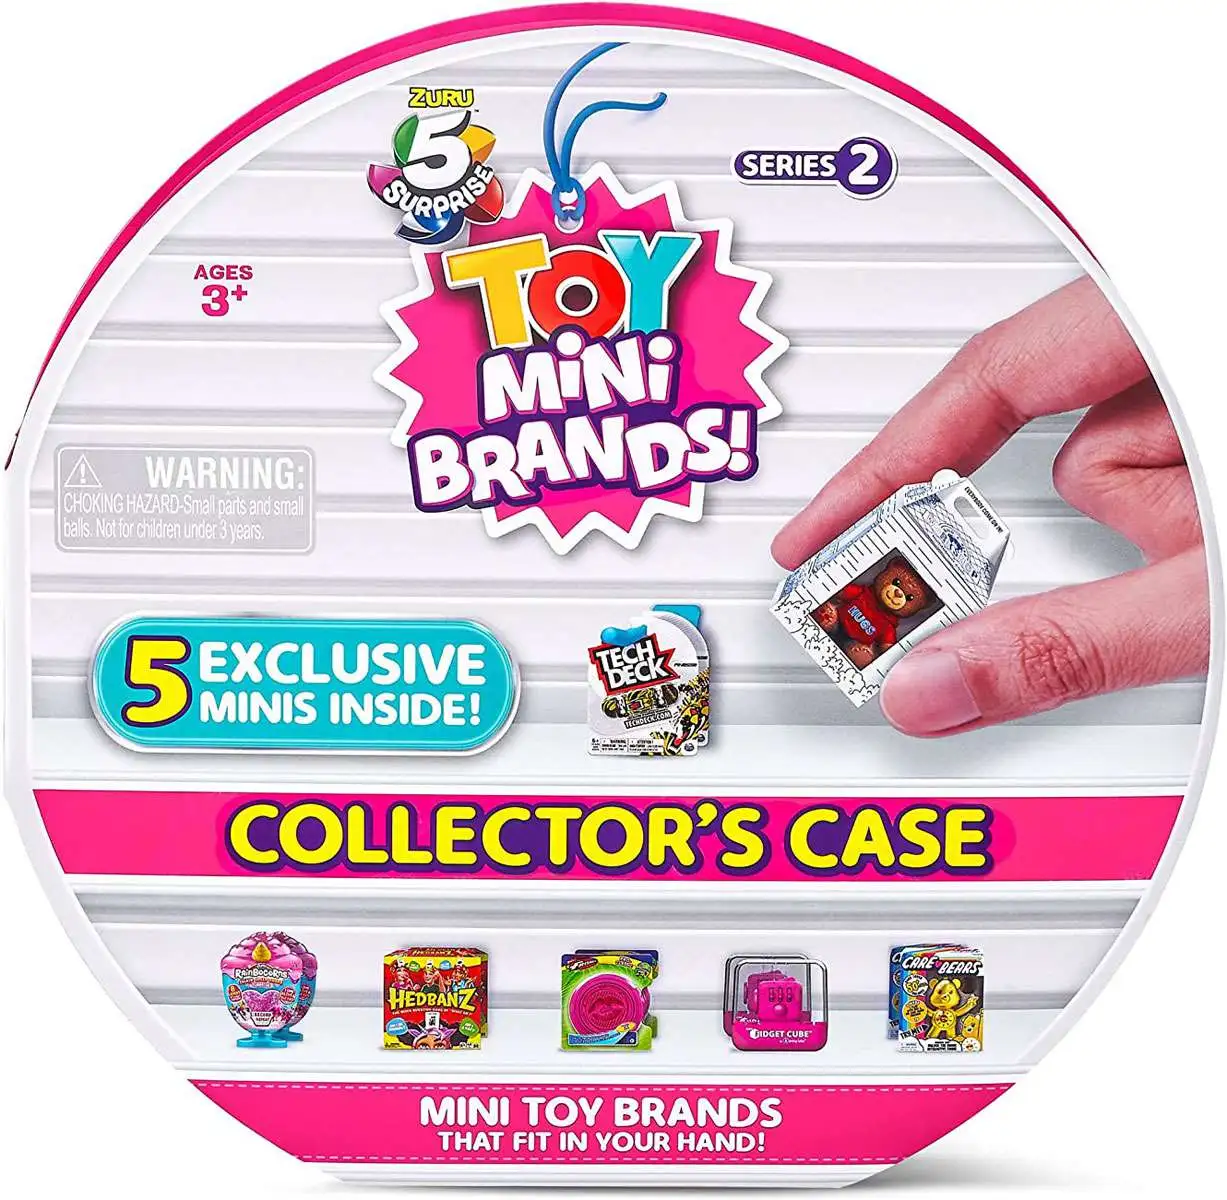 Includes 4 x Toys NEW 5 Surprise Toy Mini Brands Collector's Case by ZURU 